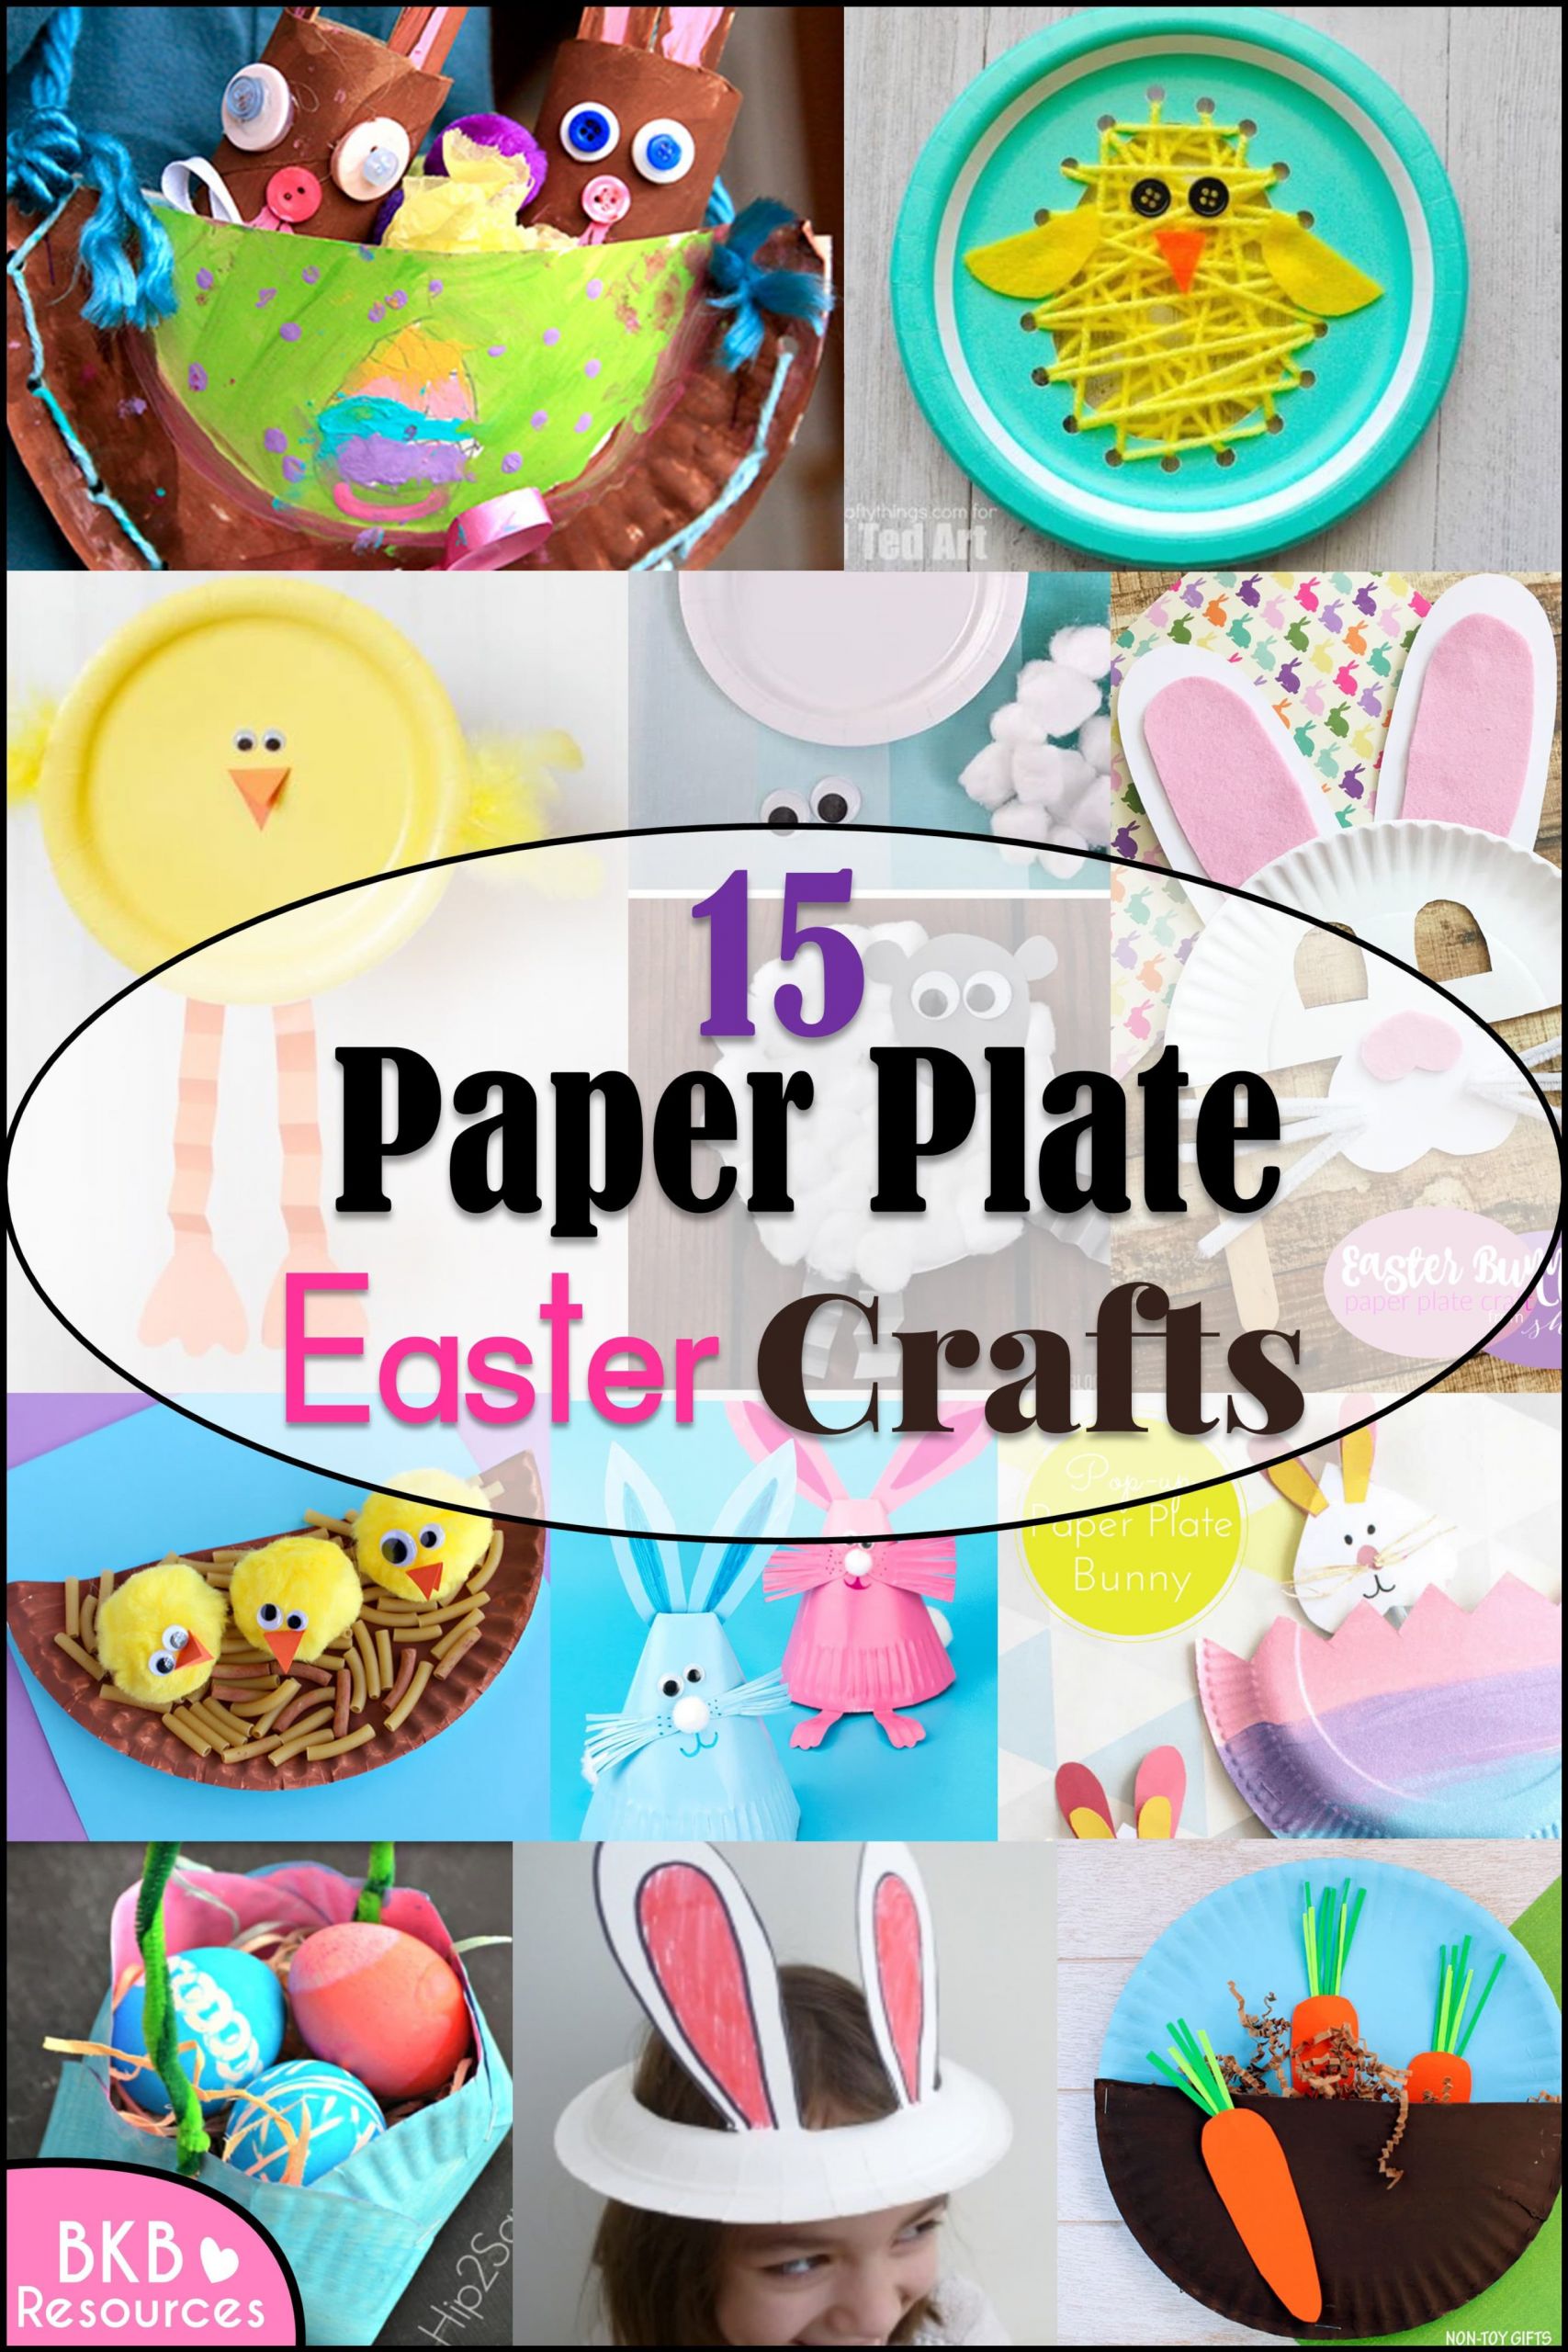 Paper Plate Easter Crafts
 15 Paper Plate Easter Crafts